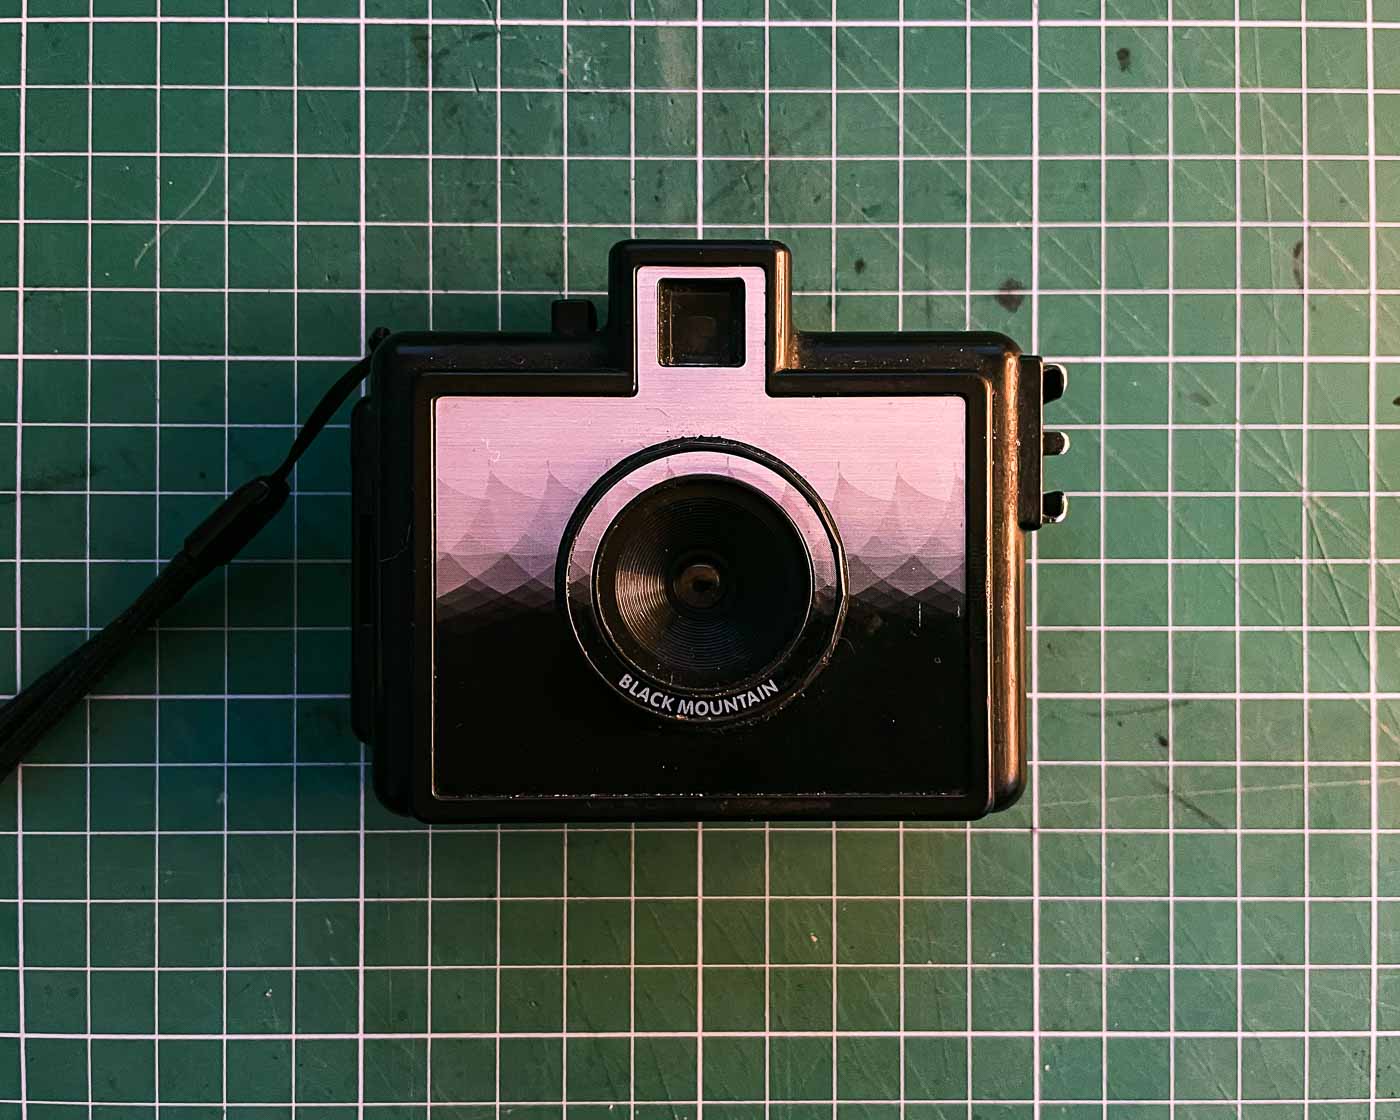 The Superheadz Golden Half Camera is a half-frame film camera that is perfect for capturing memories while traveling. Its compact size and lightweight design make it easy to carry around, and its unique half-frame format allows you to capture twice as many photos on a single roll of film.